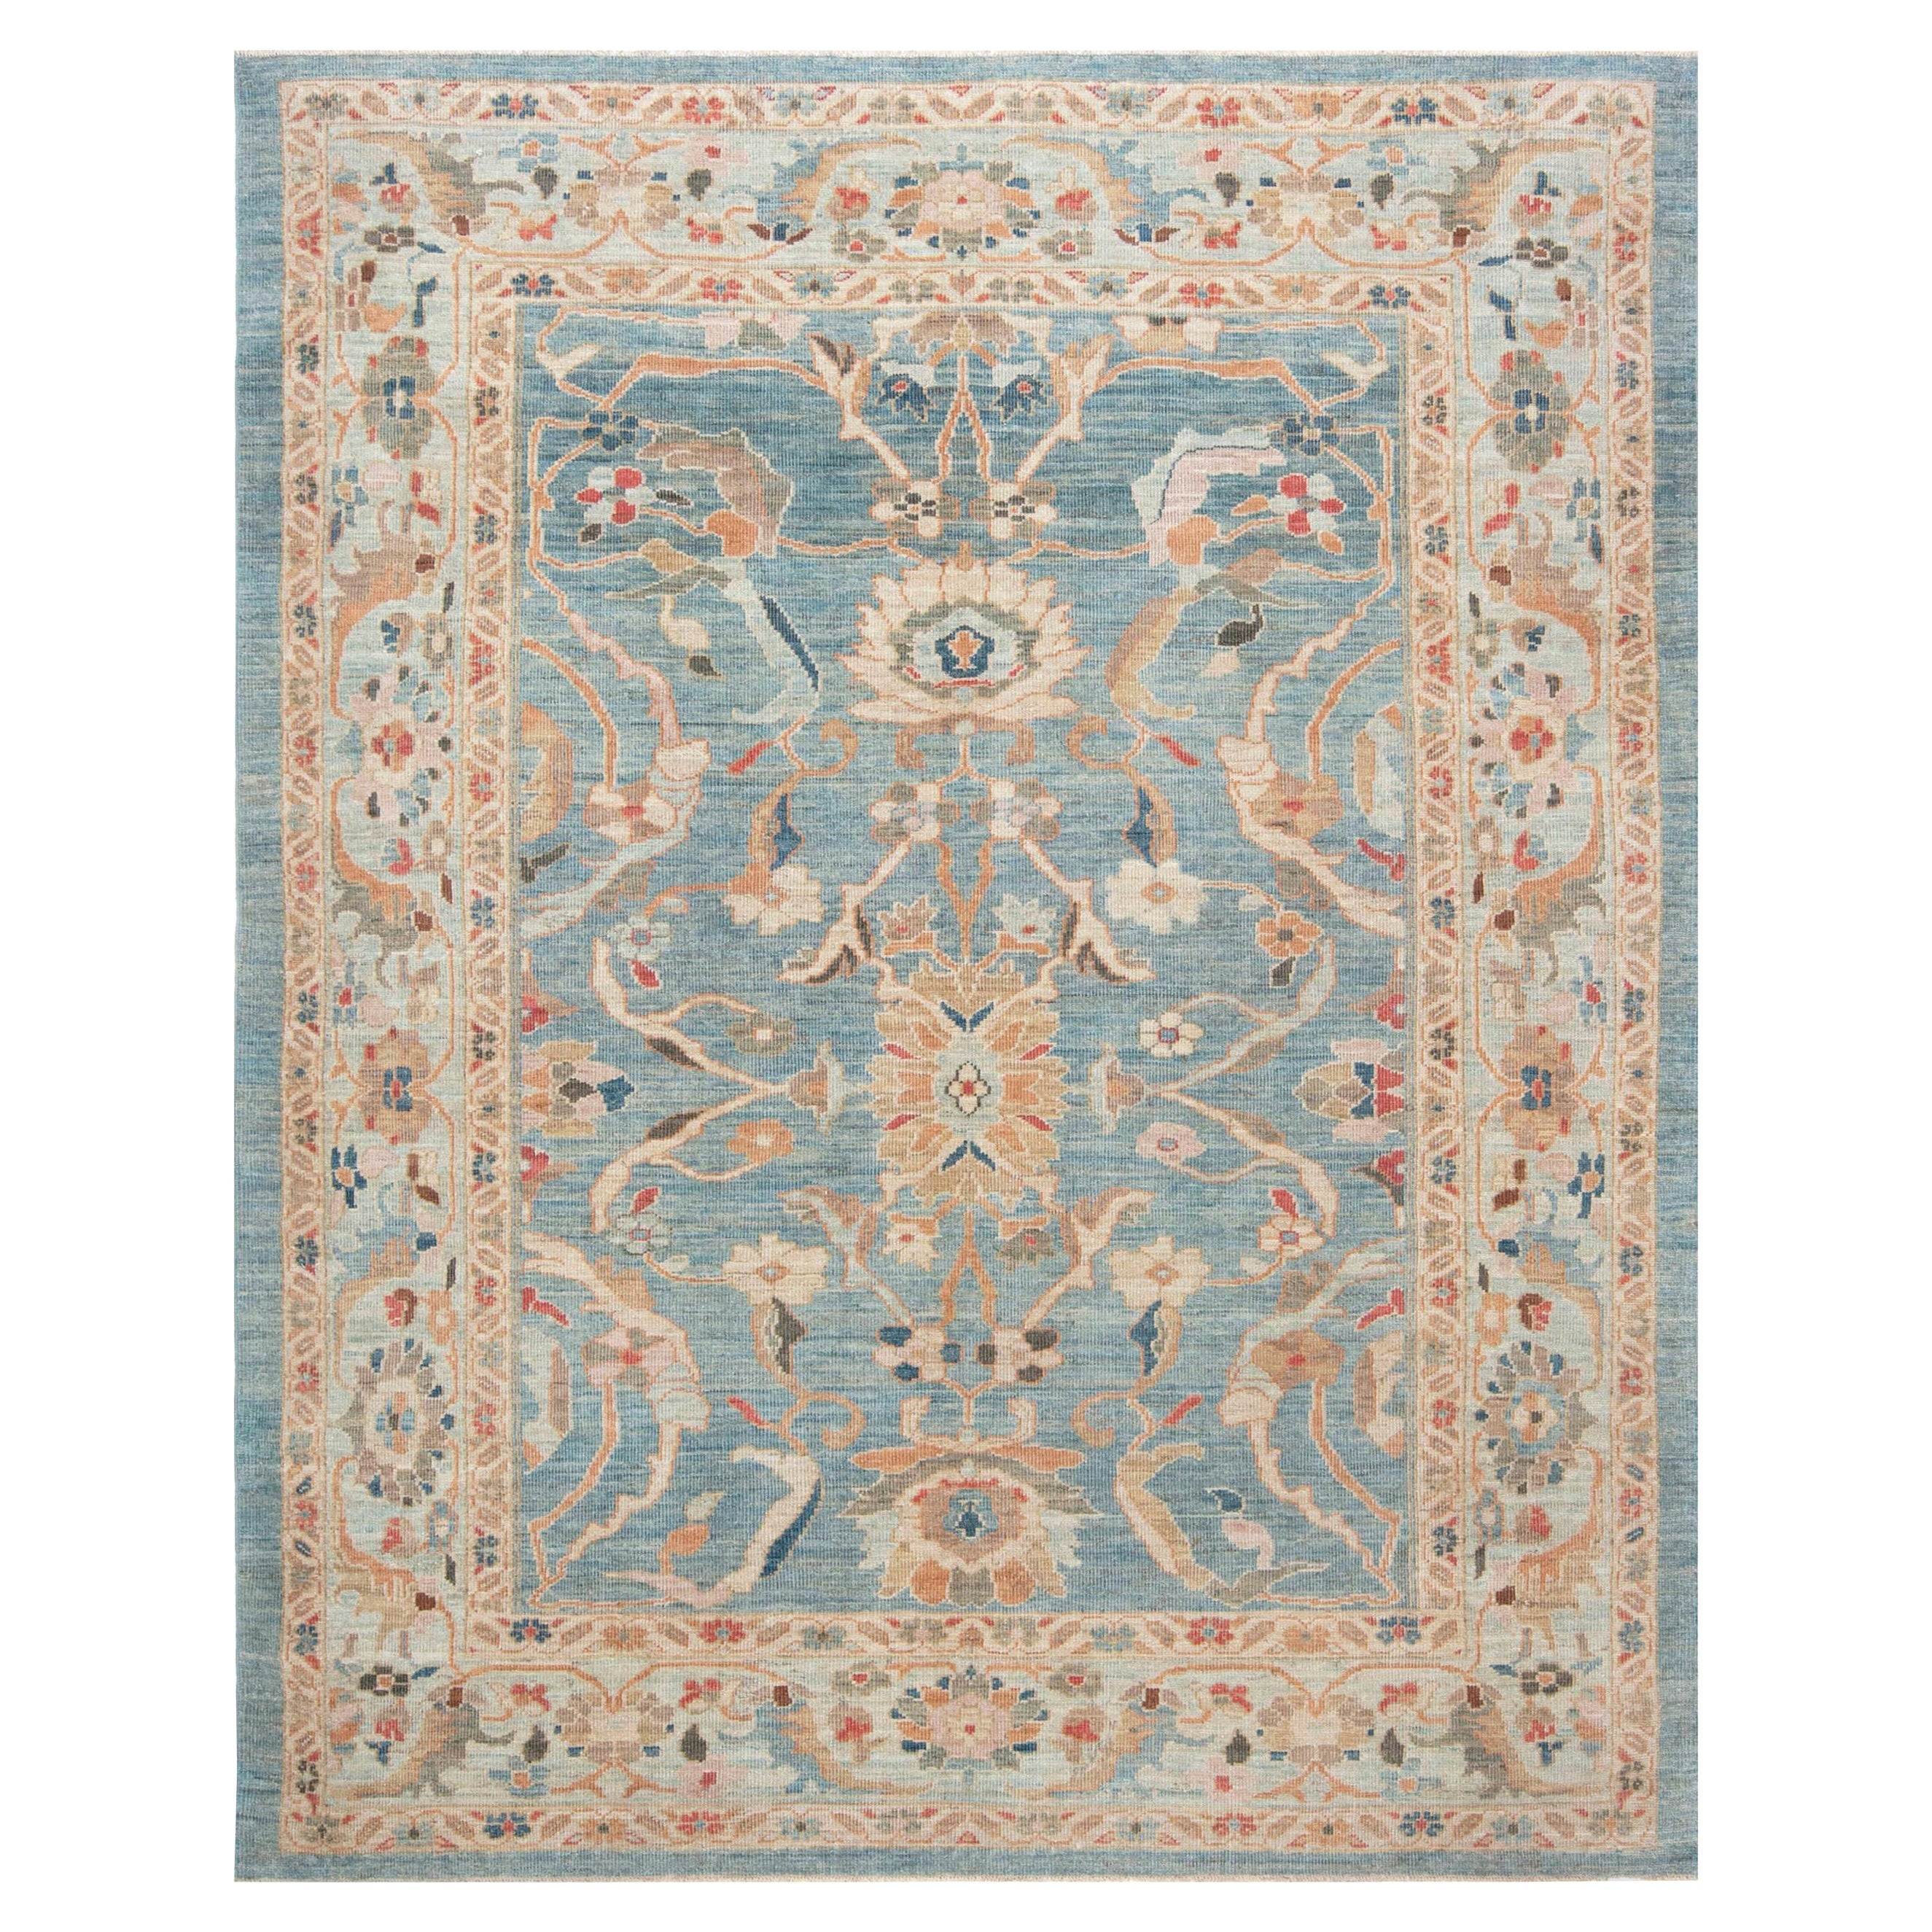 Contemporary Sultanabad Style Handmade Wool Rug by Doris Leslie Blau For Sale